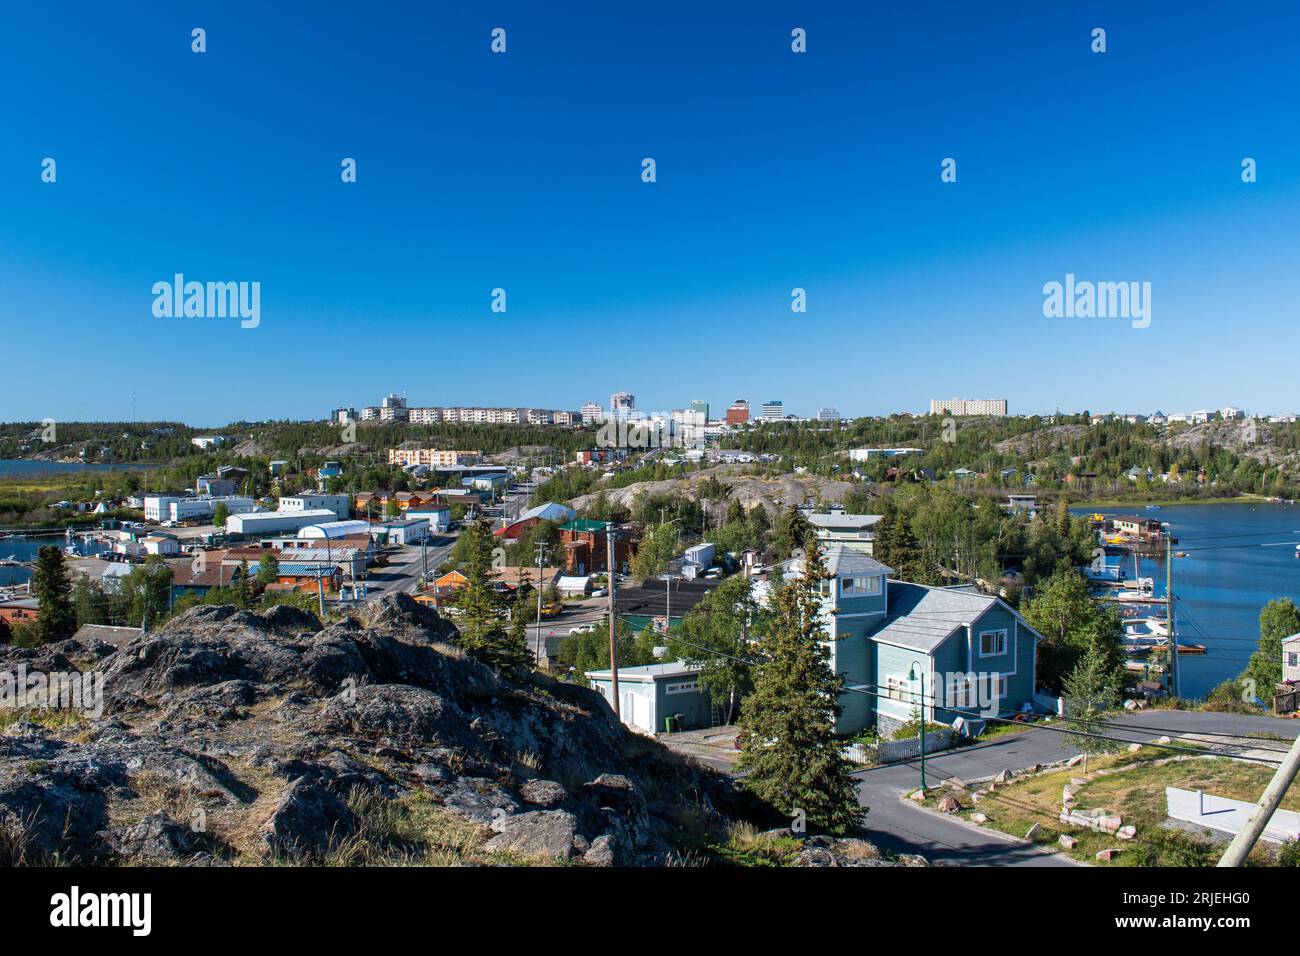 Yellowknife, NT / Canada - 13 August 2022: Summer view of city of Yellowknife in Northwest Territories, Canada Stock Photo